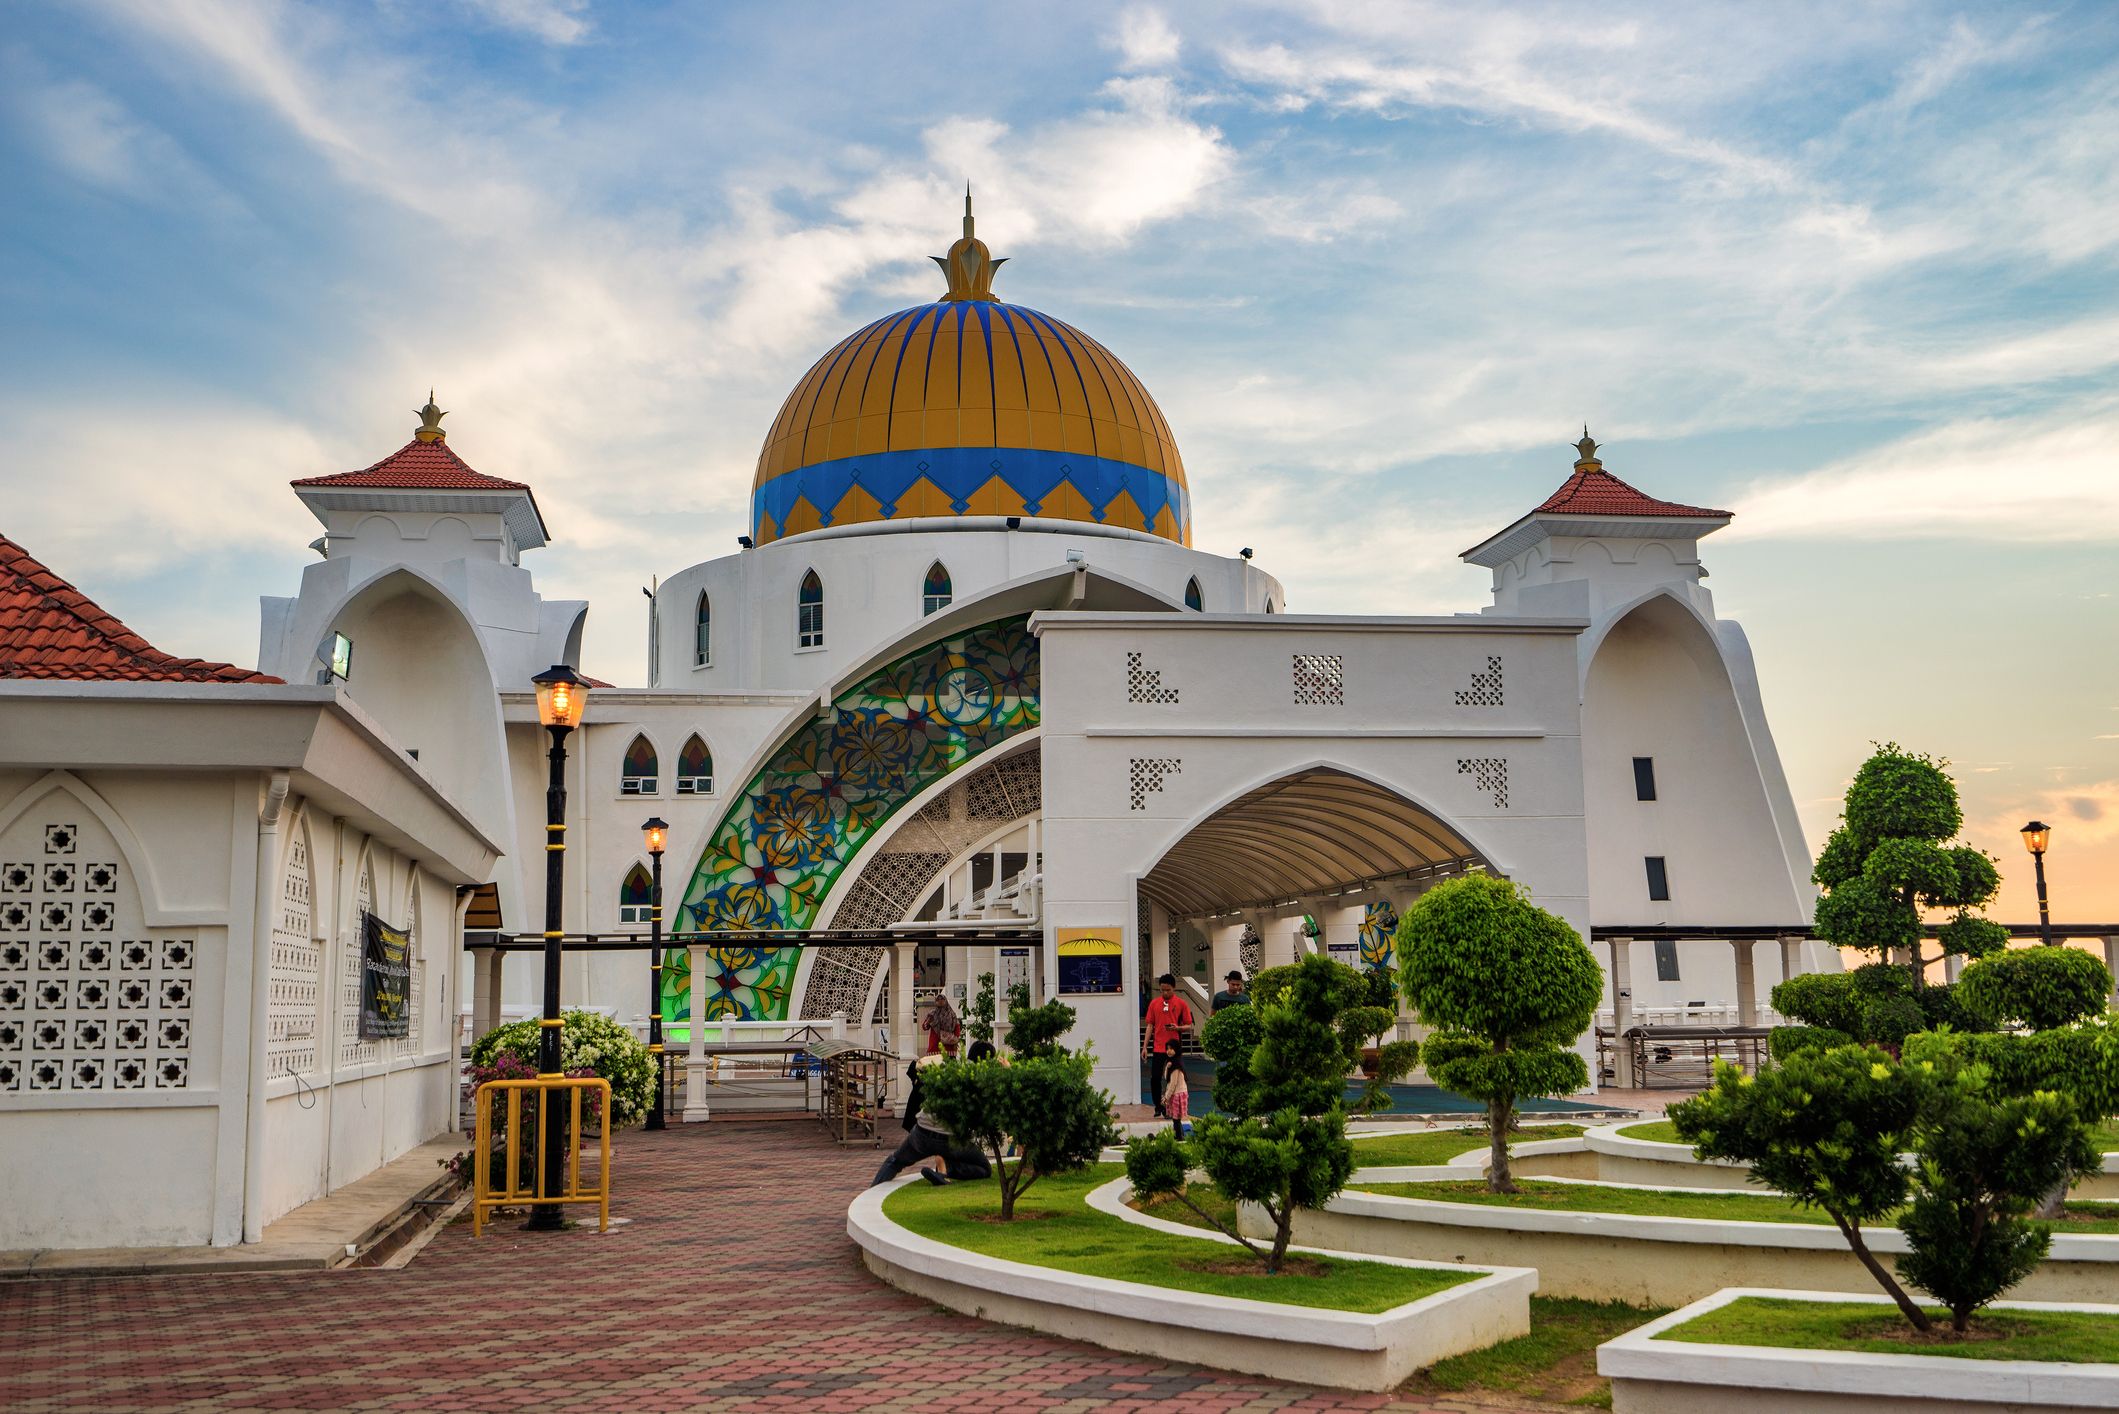 The Malacca Straits Mosque in Malacca state Malaysia